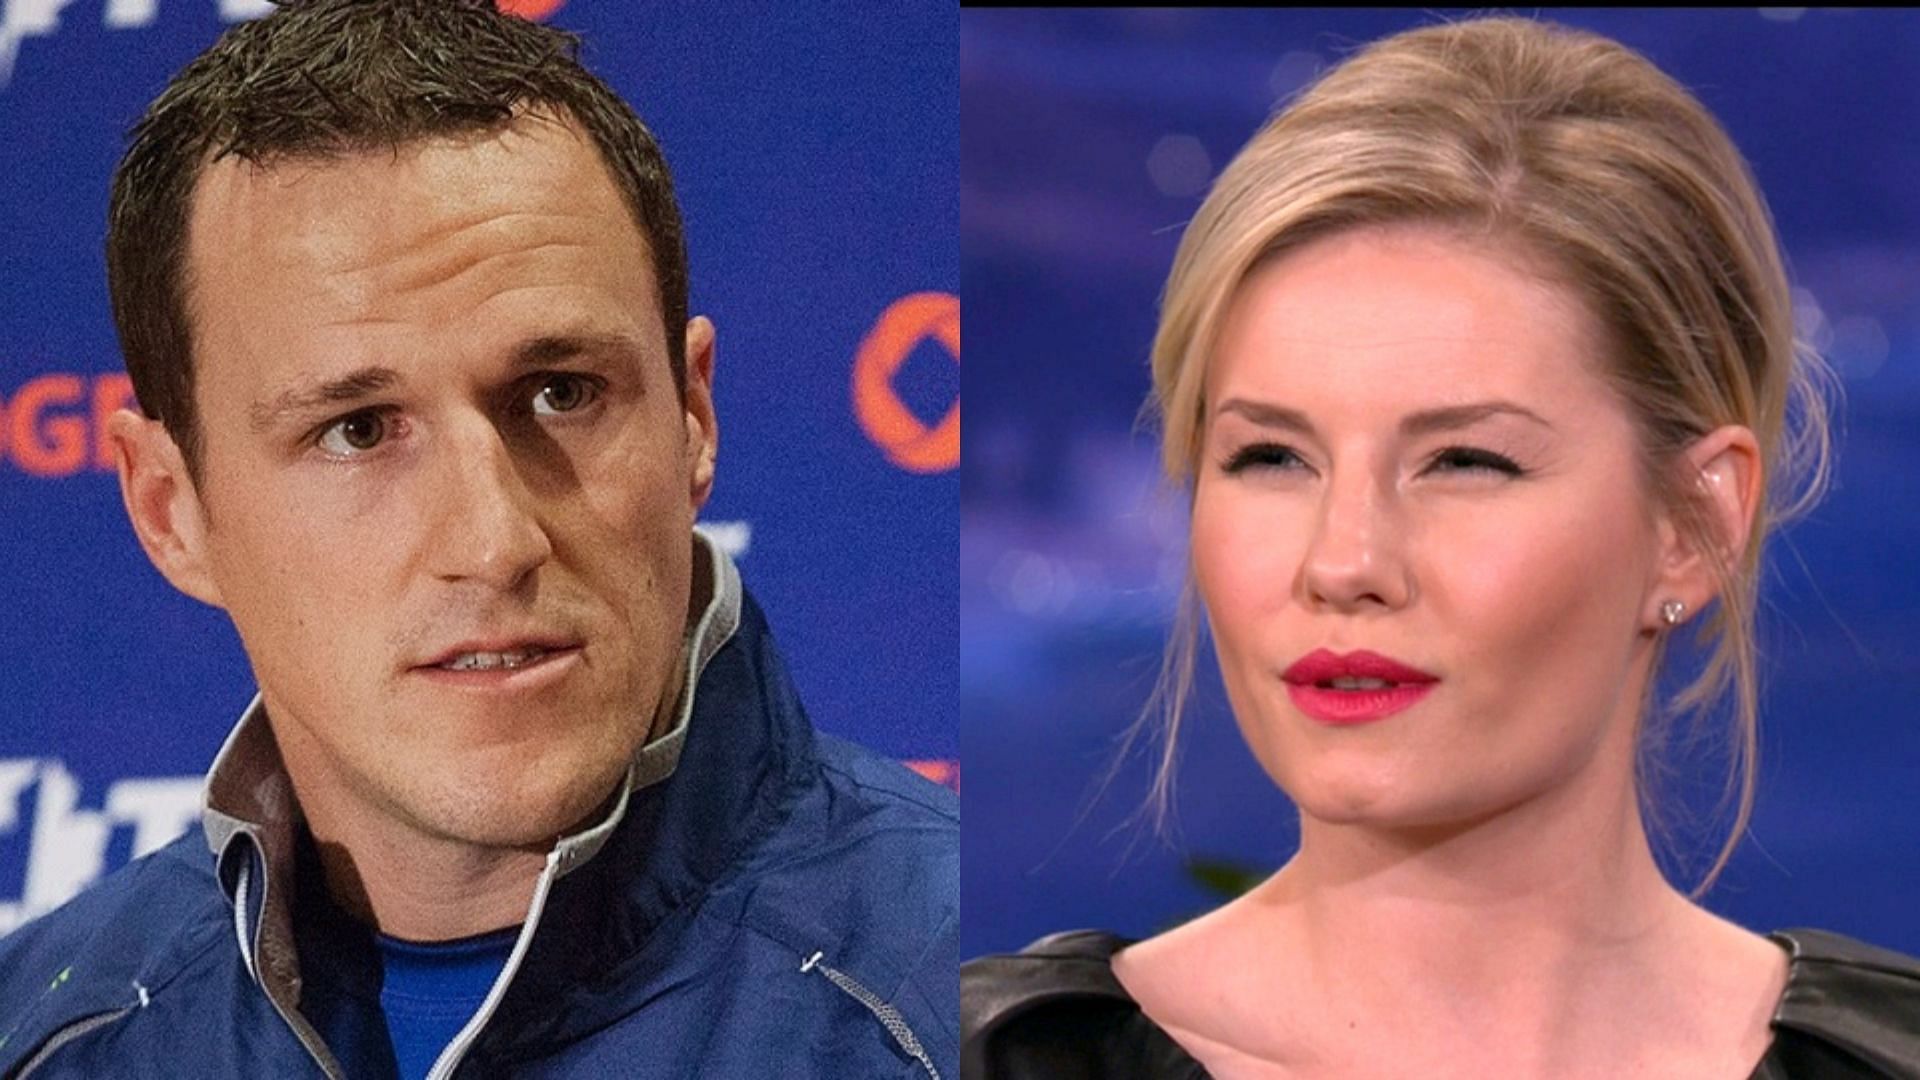 Dion Phaneuf (left) and Elisha Cuthbert (right)